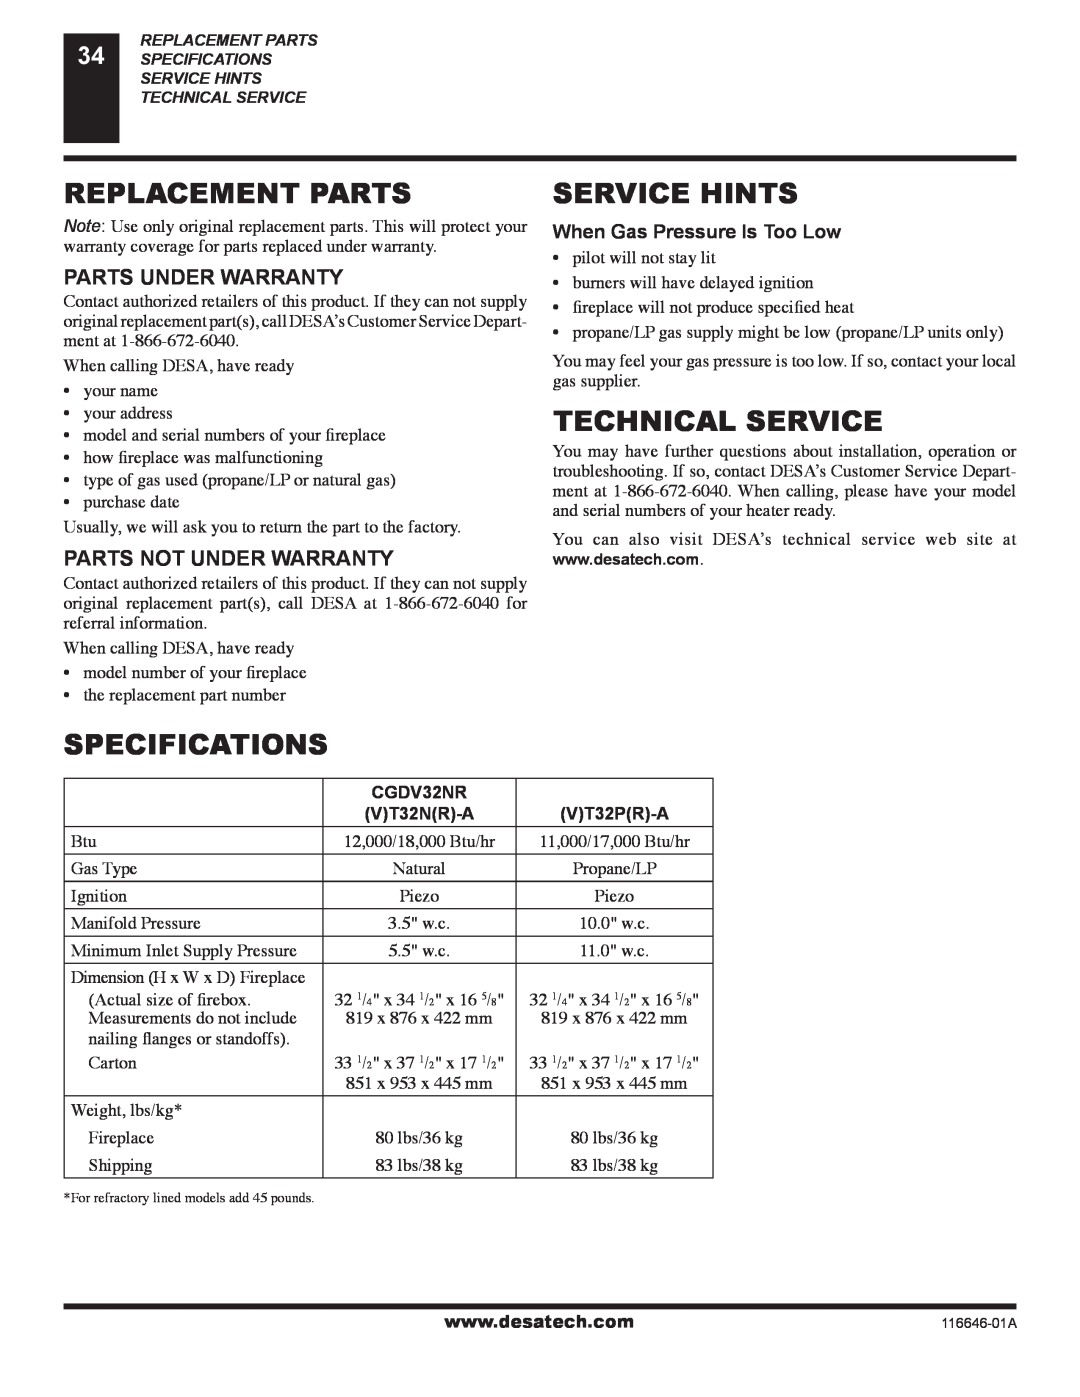 Desa (V)T32P-A Series Replacement Parts, Service Hints, Technical Service, Specifications, When Gas Pressure Is Too Low 